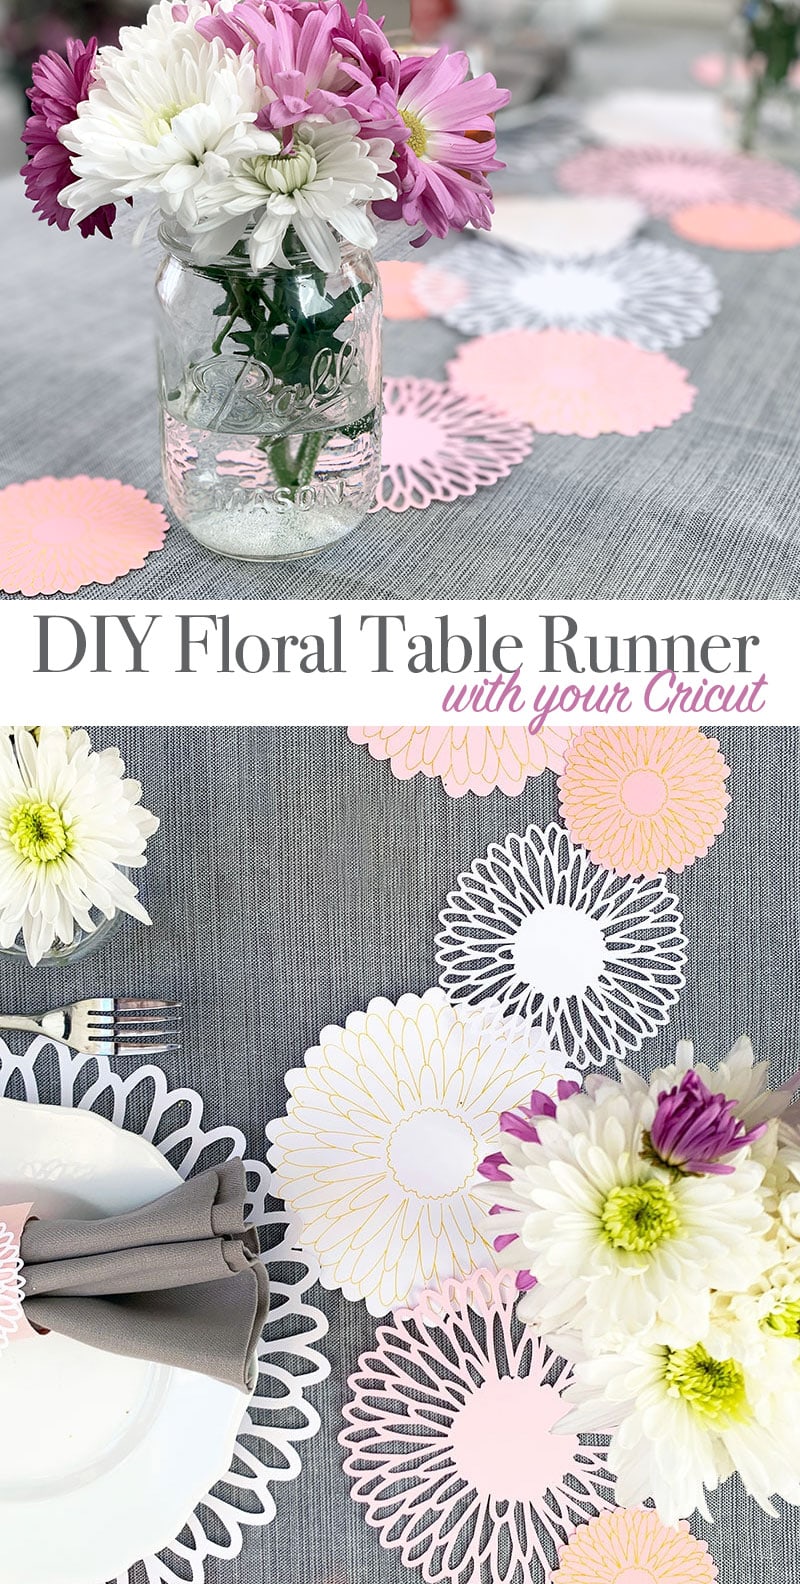 Decorate your table with Cricut flower cutouts designed by Jen Goode. Perfect for pretty Mother's Day brunch decor.